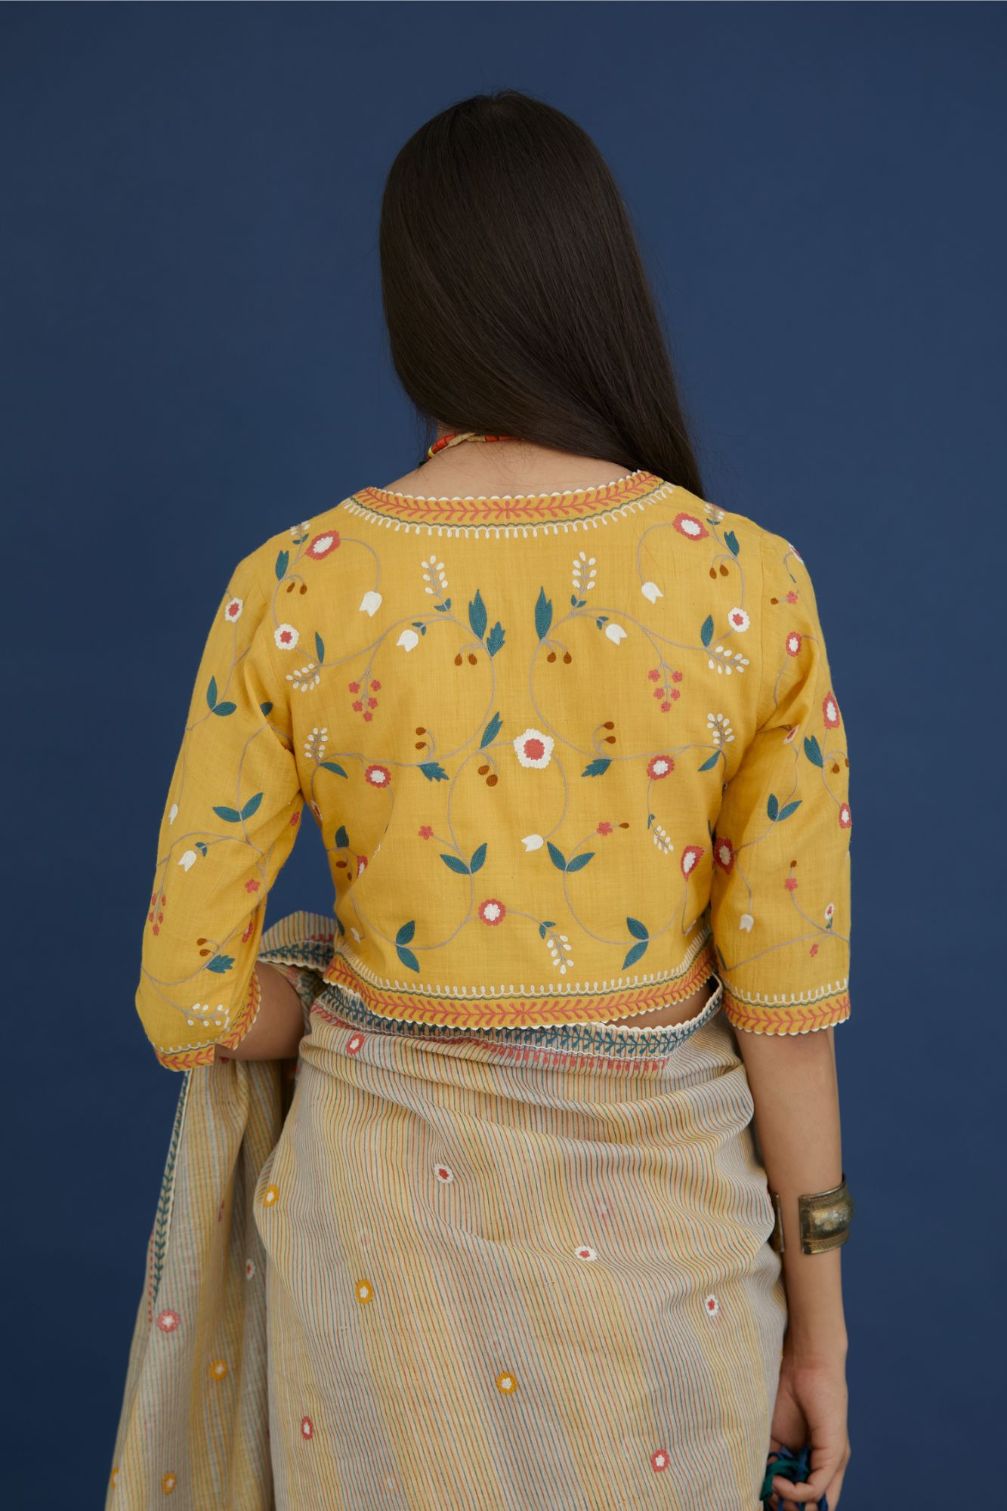 Corn yellow tank top blouse with all-over multi colored thread embroidery highlighted with ric-rac.(Blouse)